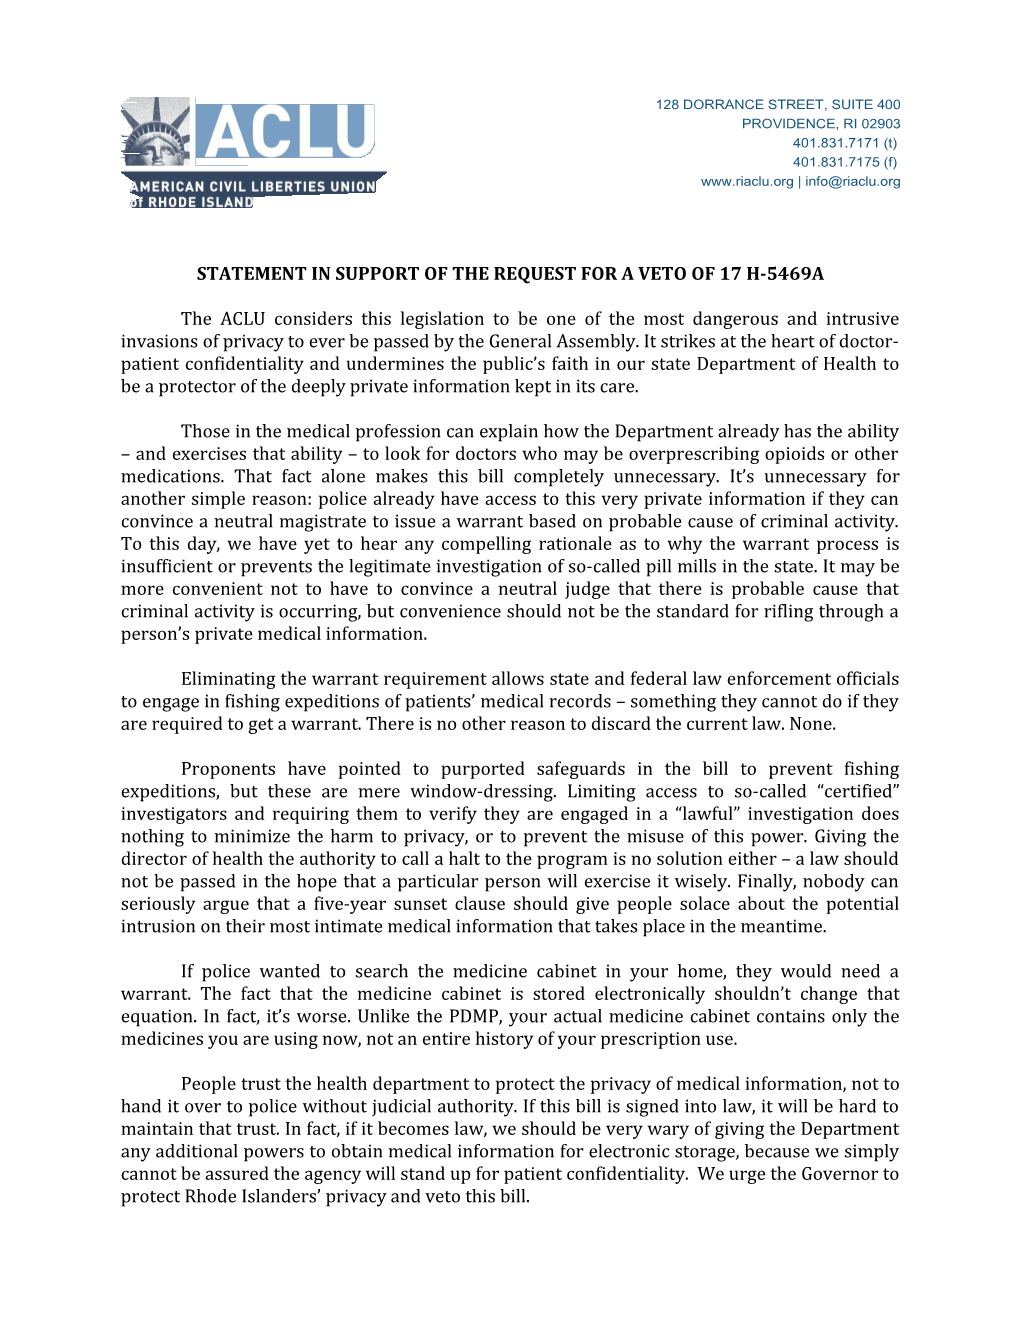 Statement in Support of the Request for a Veto of 17 H-5469A